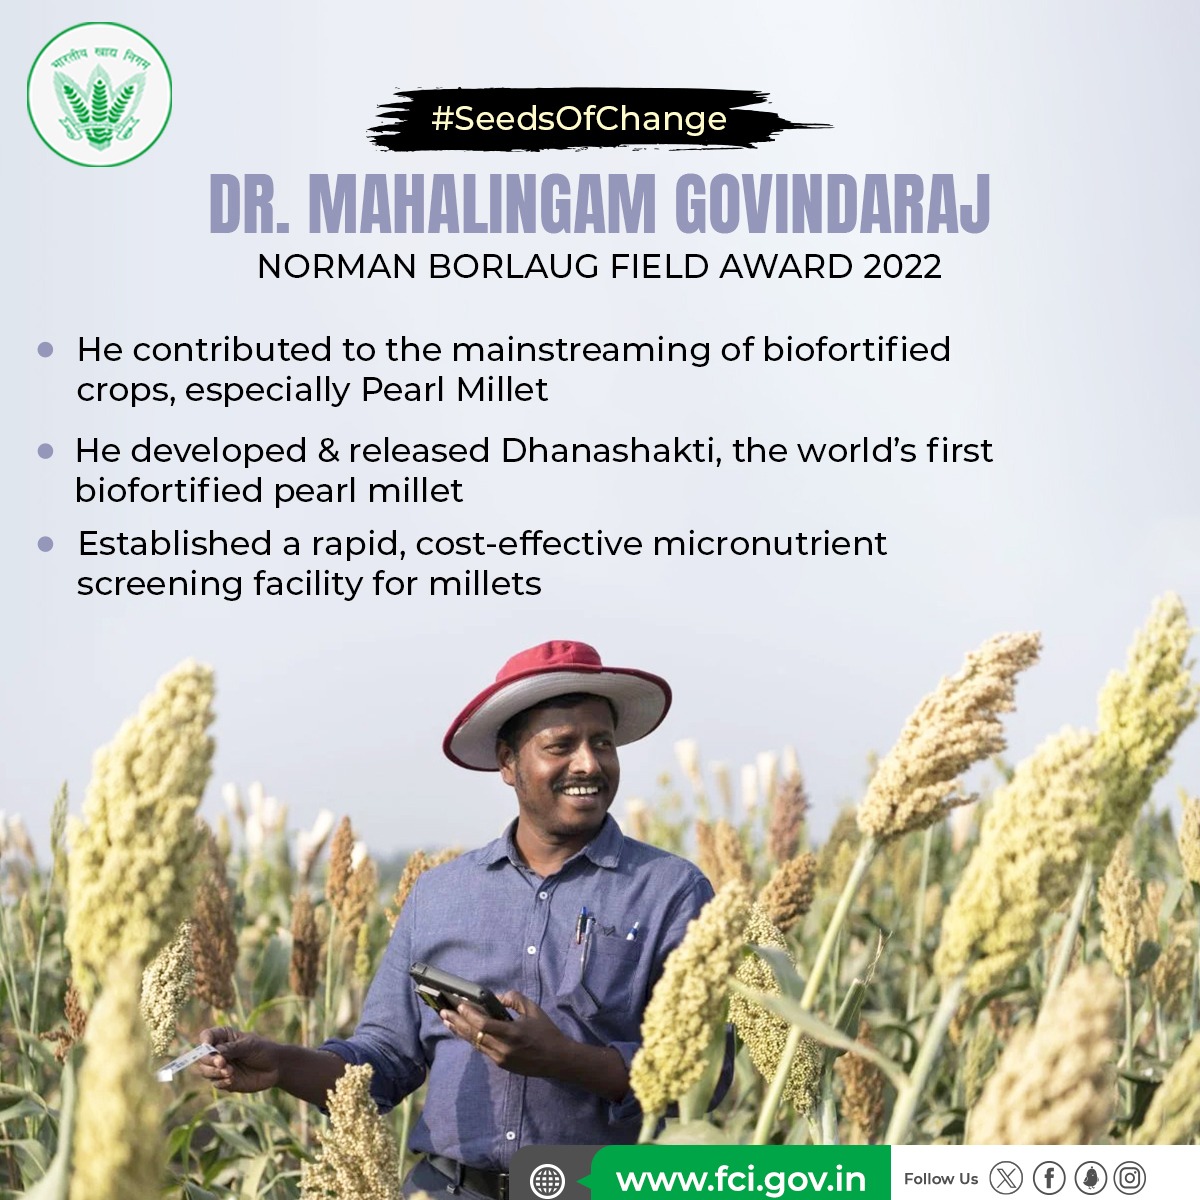 Dr. Mahalingam Govindaraj's commitment to crop improvement and sustainable agriculture has made a significant impact on global food security and the well-being of farmers. #SeedsOfChange #WorldFoodDay2023 #WorldFoodPrize